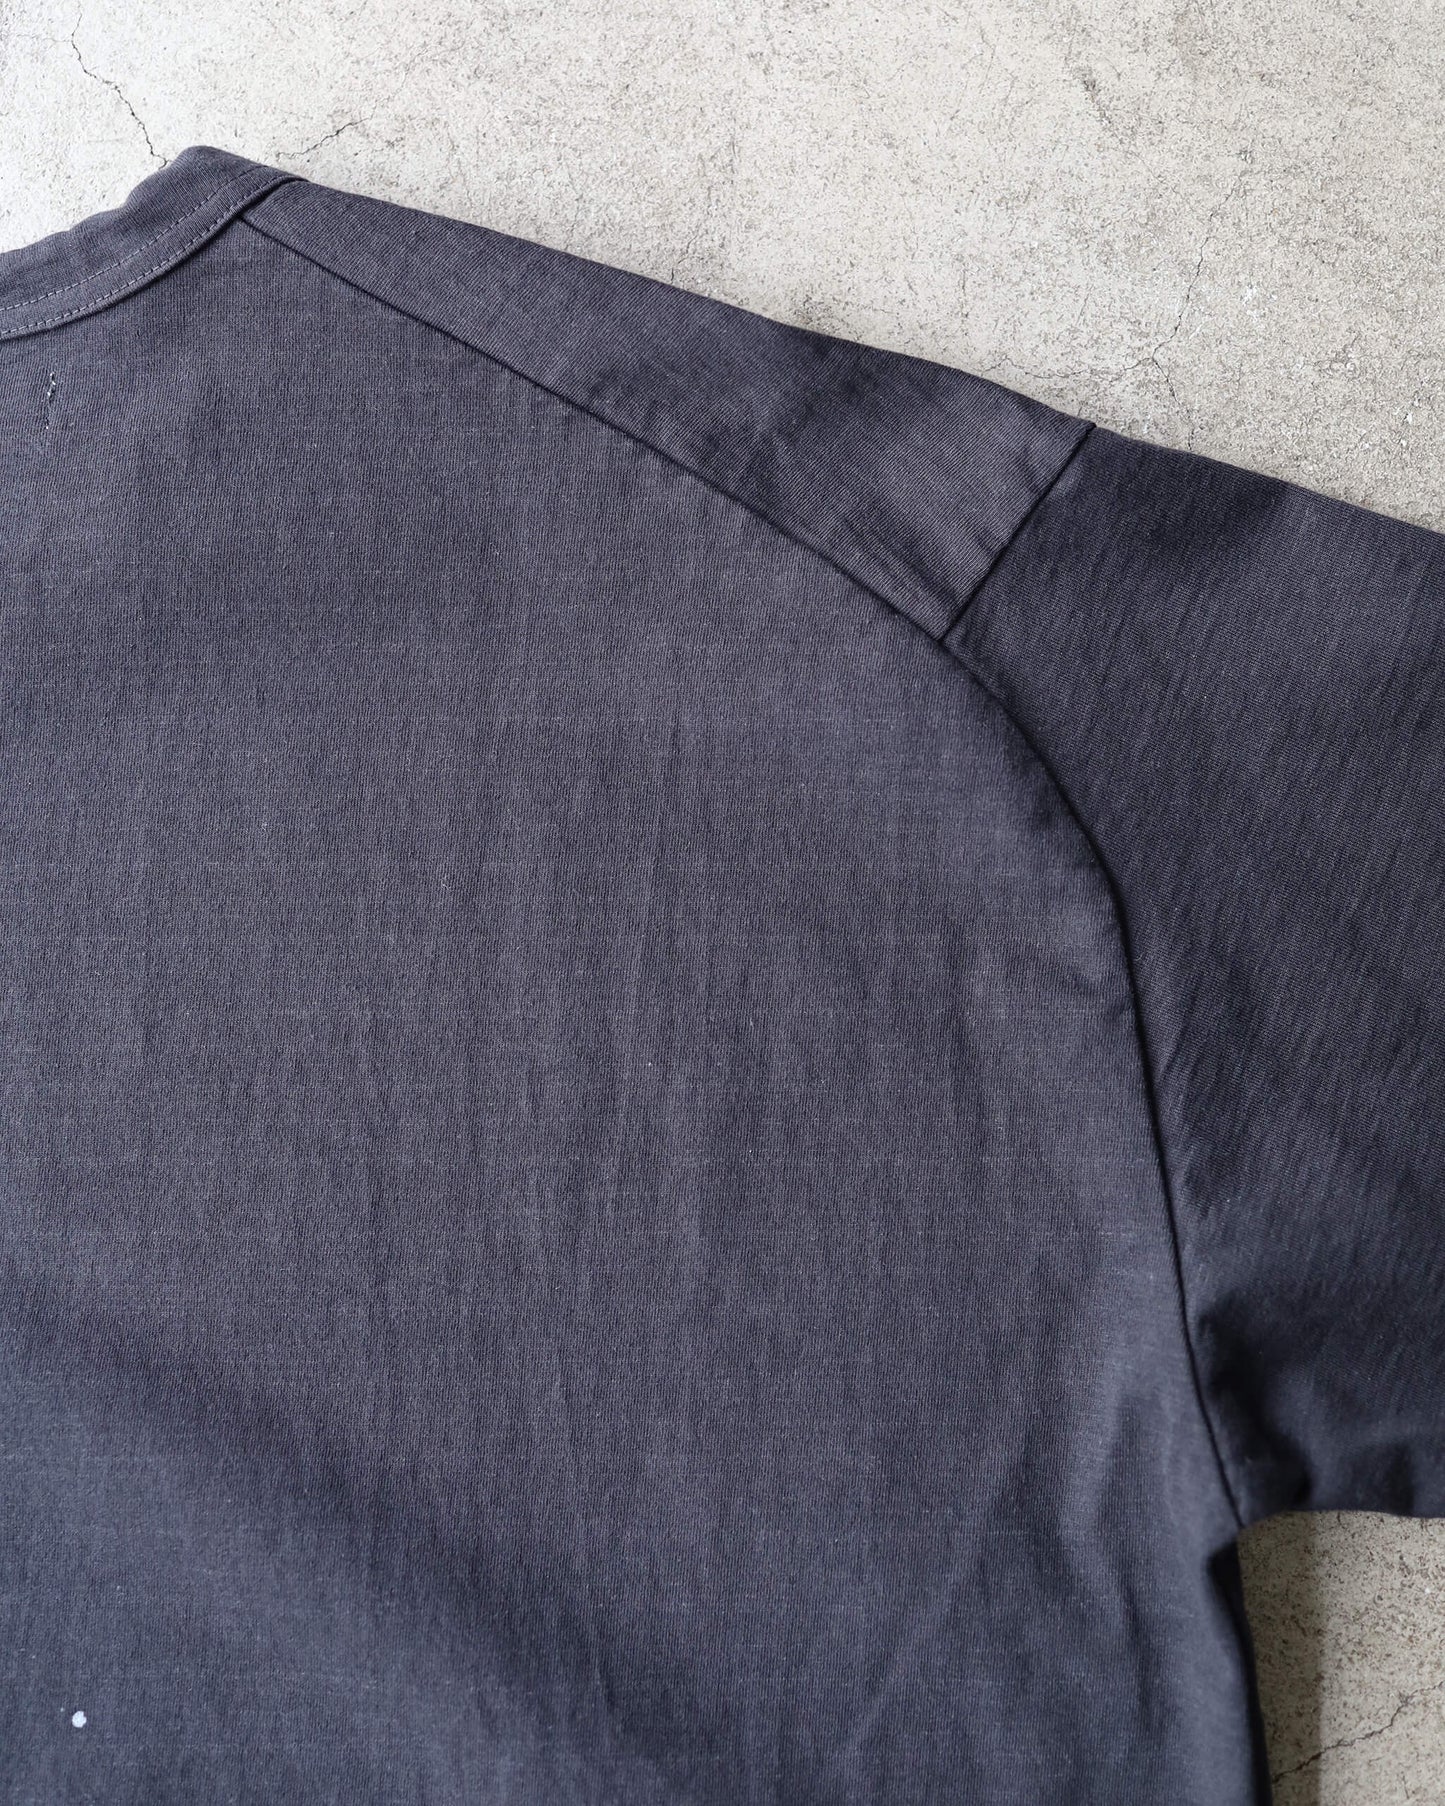 HAND PRINTED COTTON JERSEY / CREW NECK T-SHIRT "CHARCOAL"